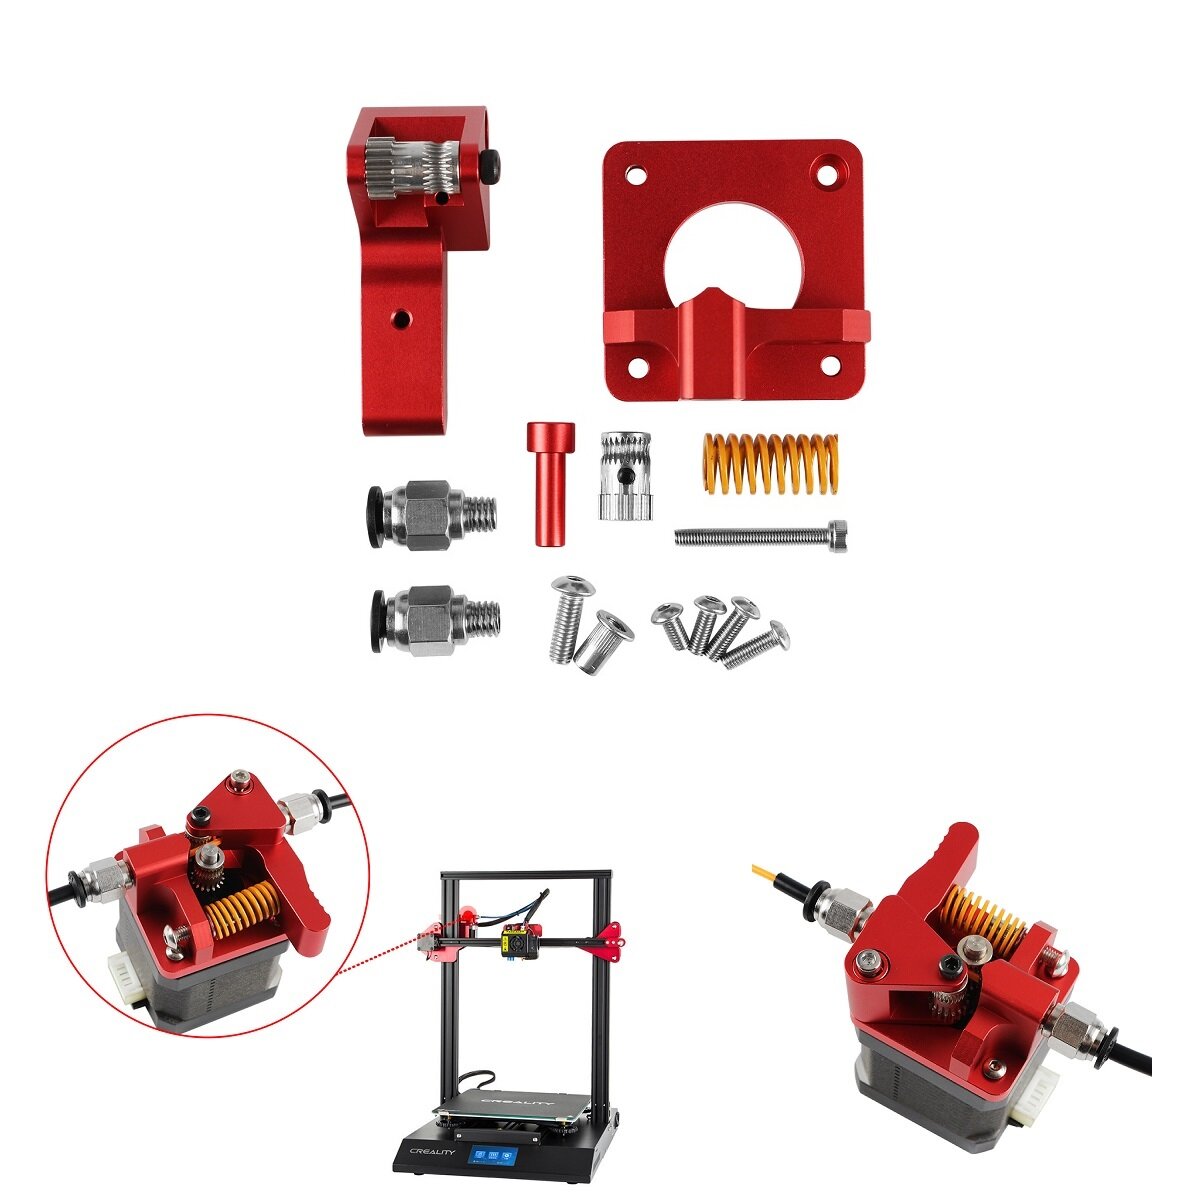 Upgraded Aluminum Dual Gear Pulley Dual Drive Extruder Kit For Creality CR-10 / CR-10S / CR-10S Pro / Ender-3 / Ender-3